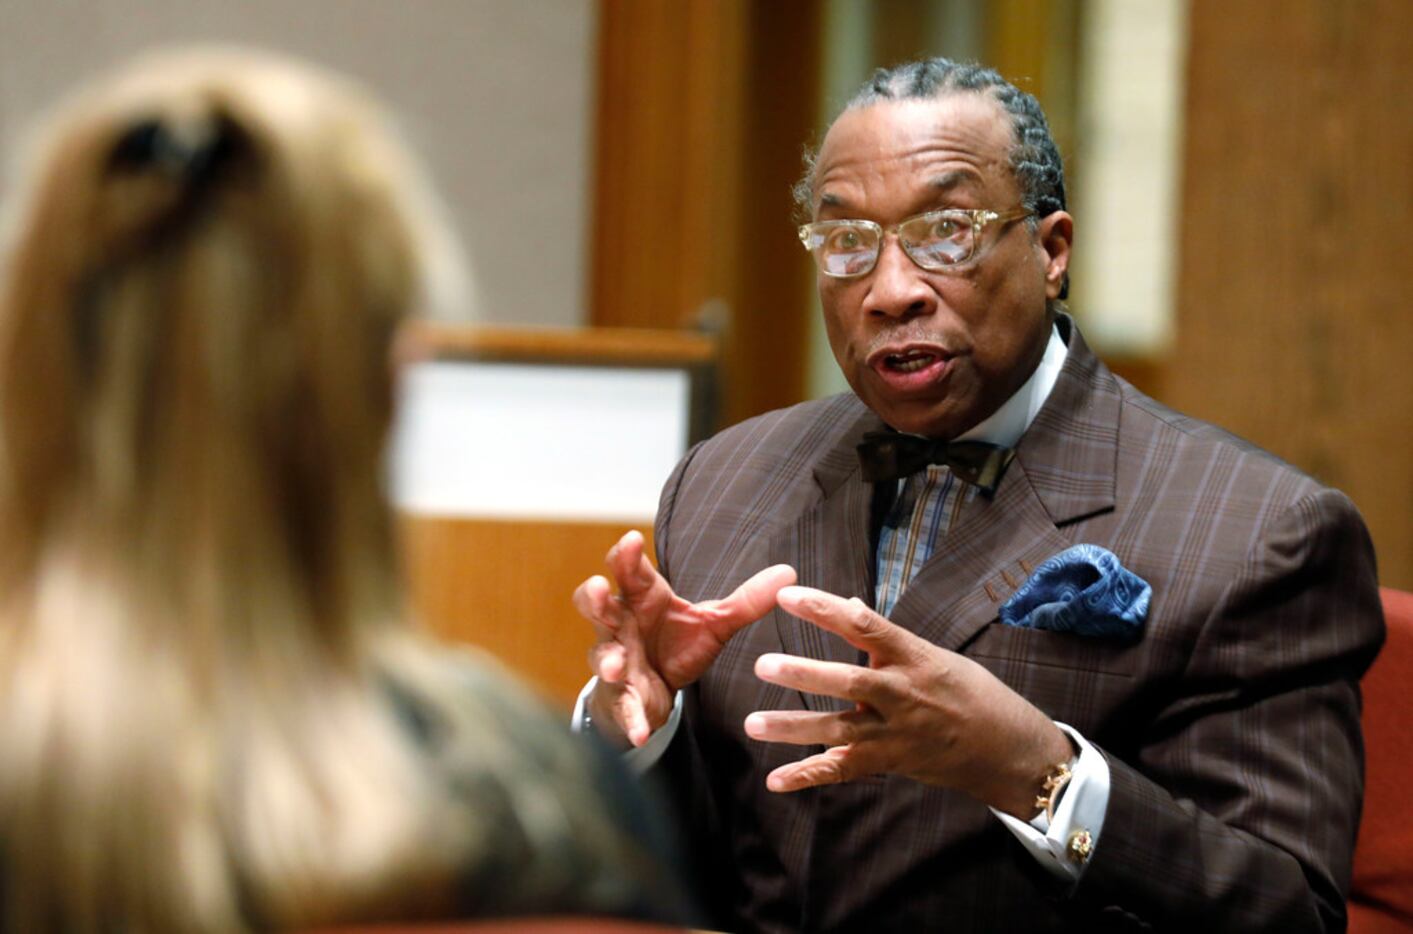 Dallas County Commissioner John Wiley Price, right, took part in a meeting with interim...